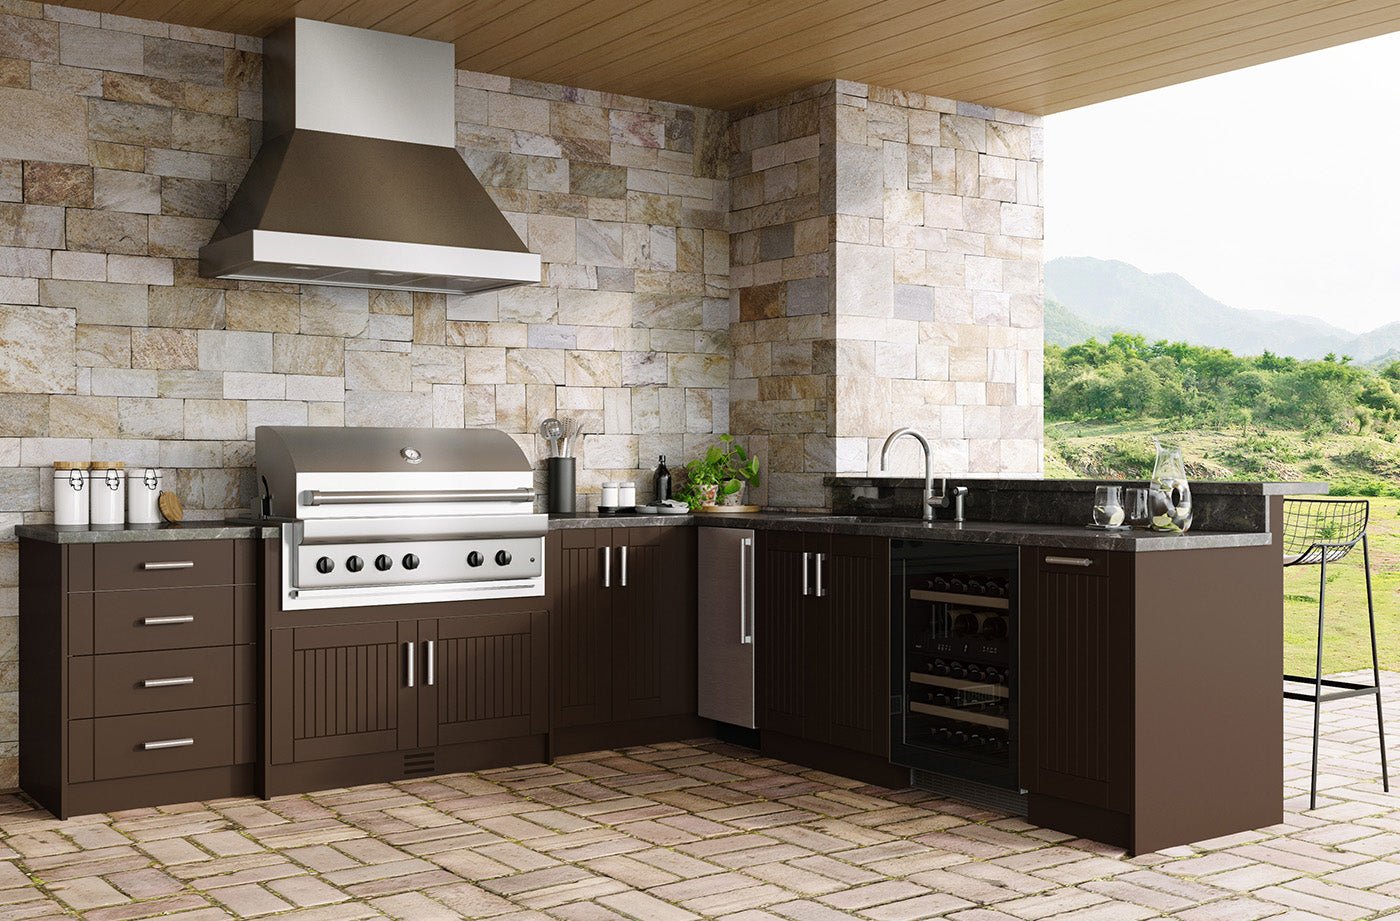 Composite L-Shaped Pre-Assembled Outdoor Kitchen Cabinet Set with Bar Riser in Multiple Colors - Sunzout Outdoor Spaces LLC